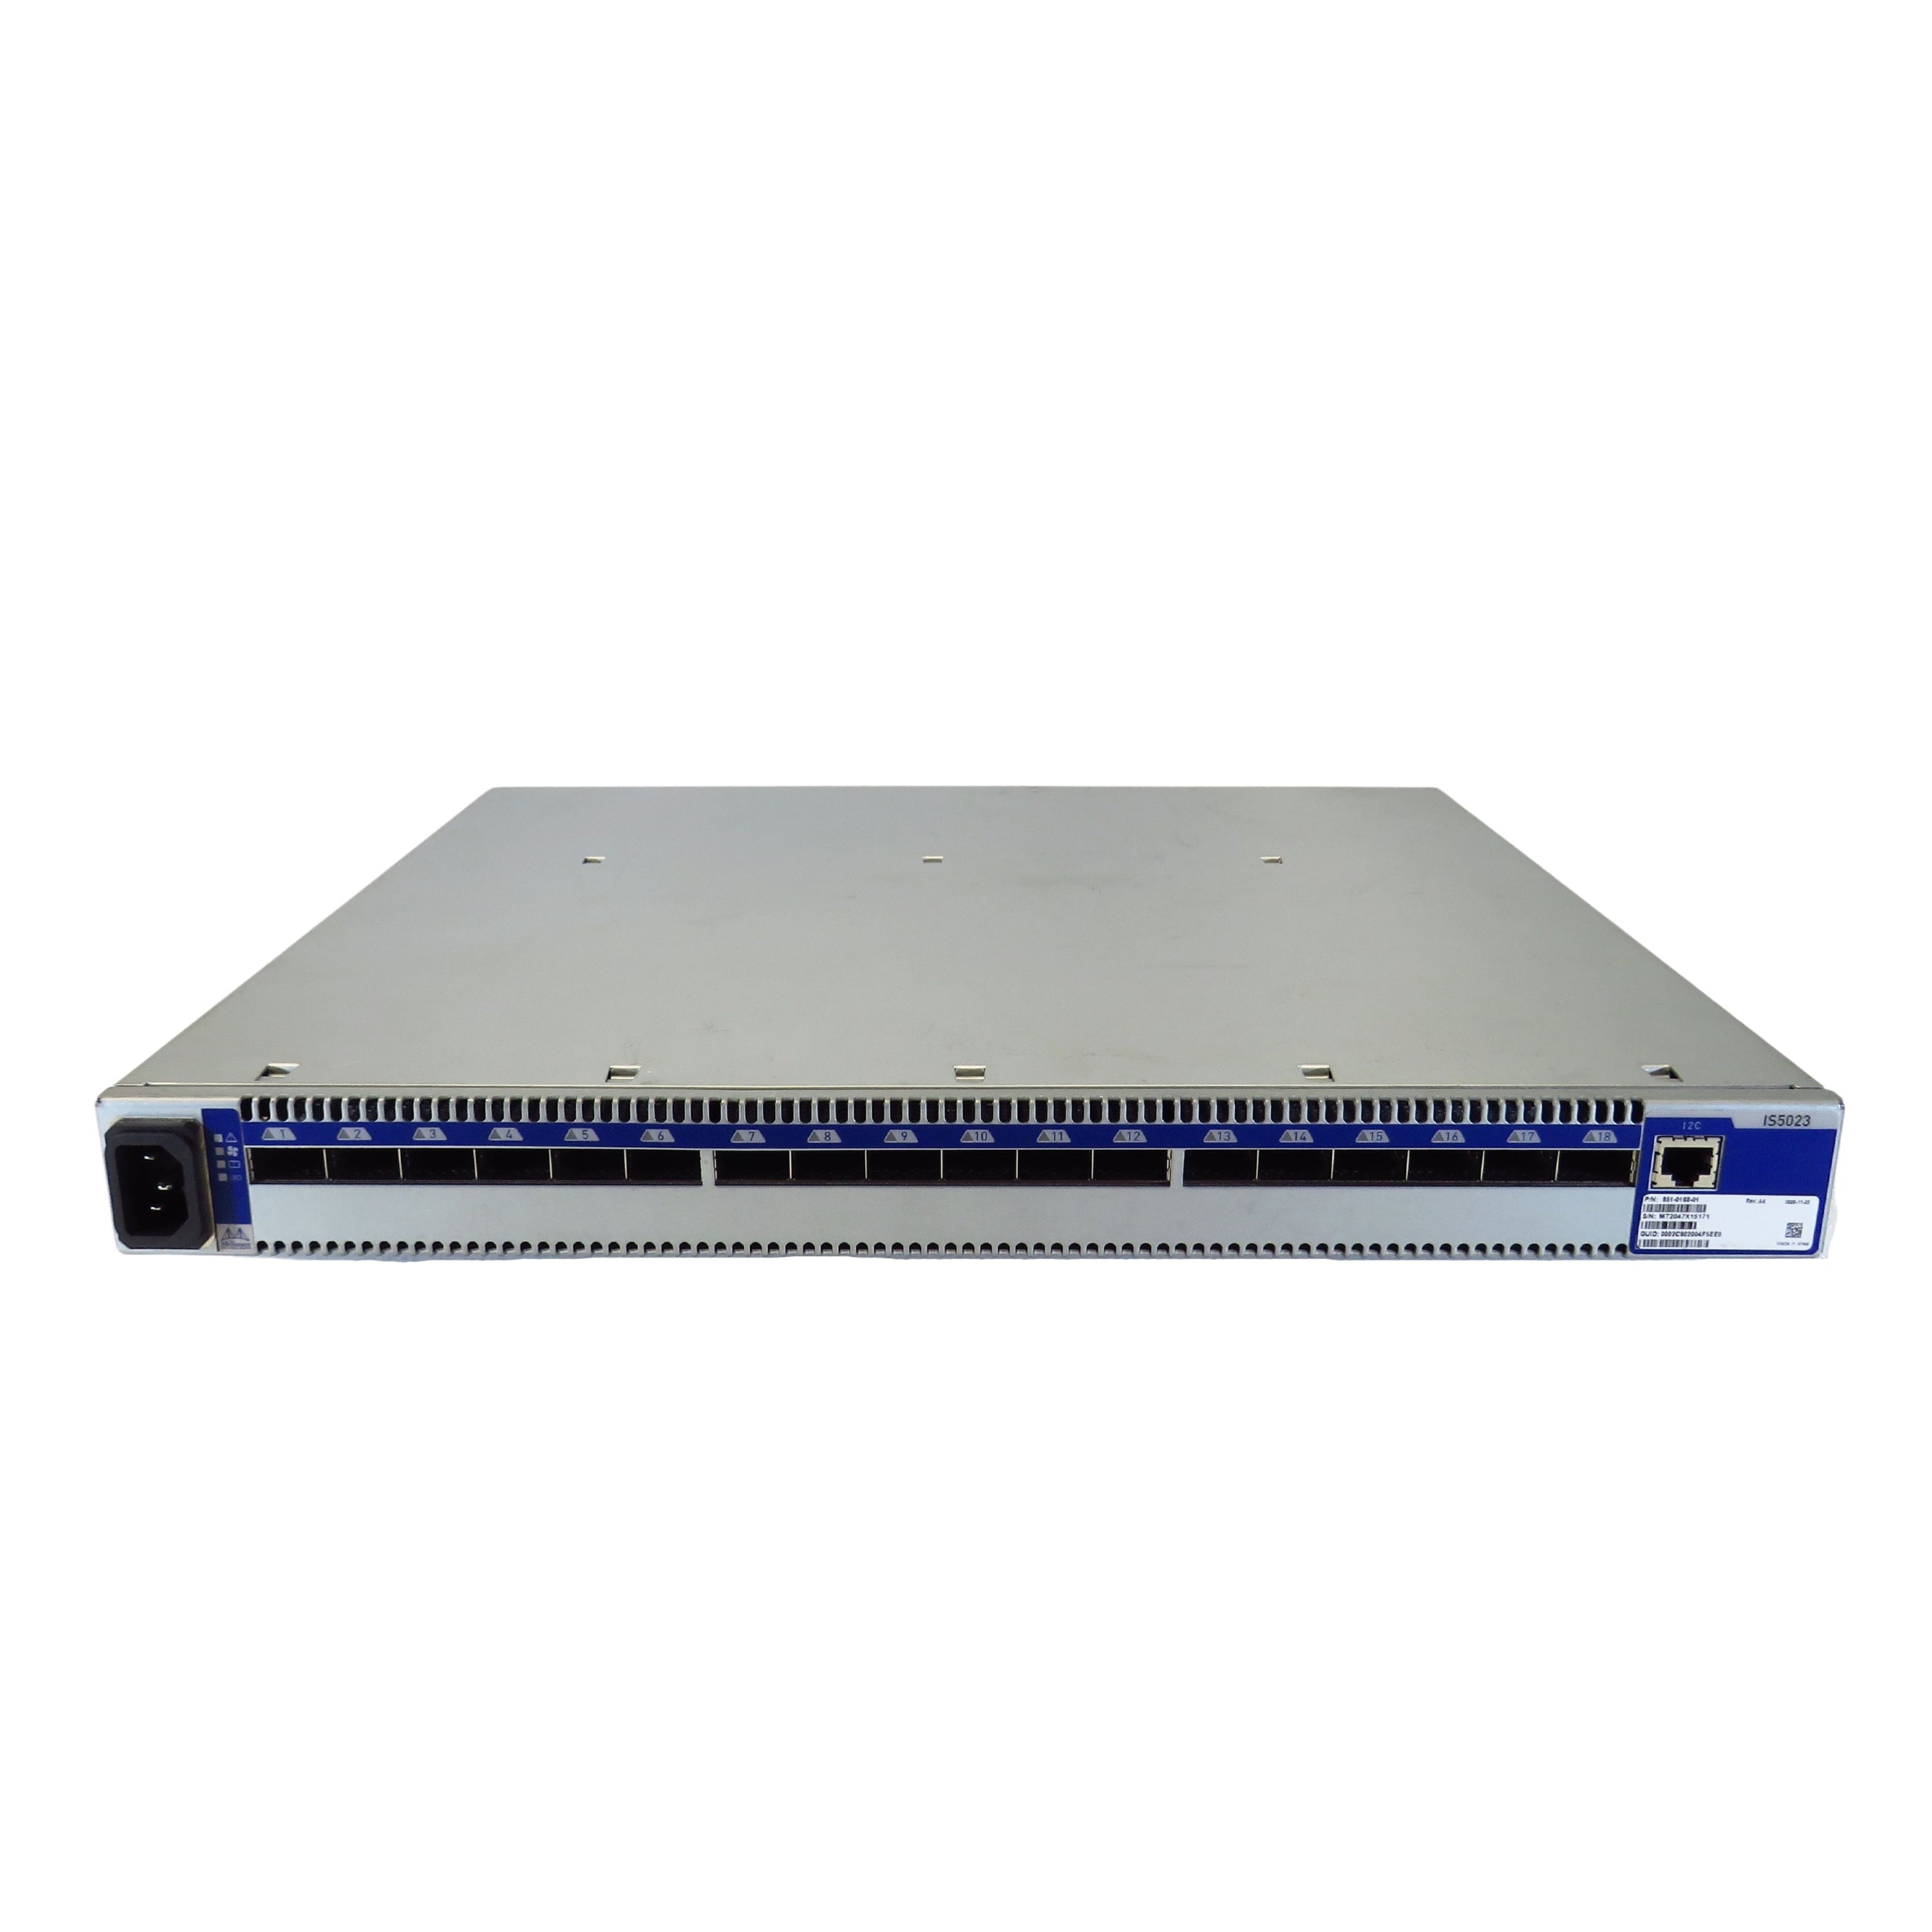 Mellanox IS5023 851-0168-01 18-Port 40Gb InfiniBand Switch InfiniScale